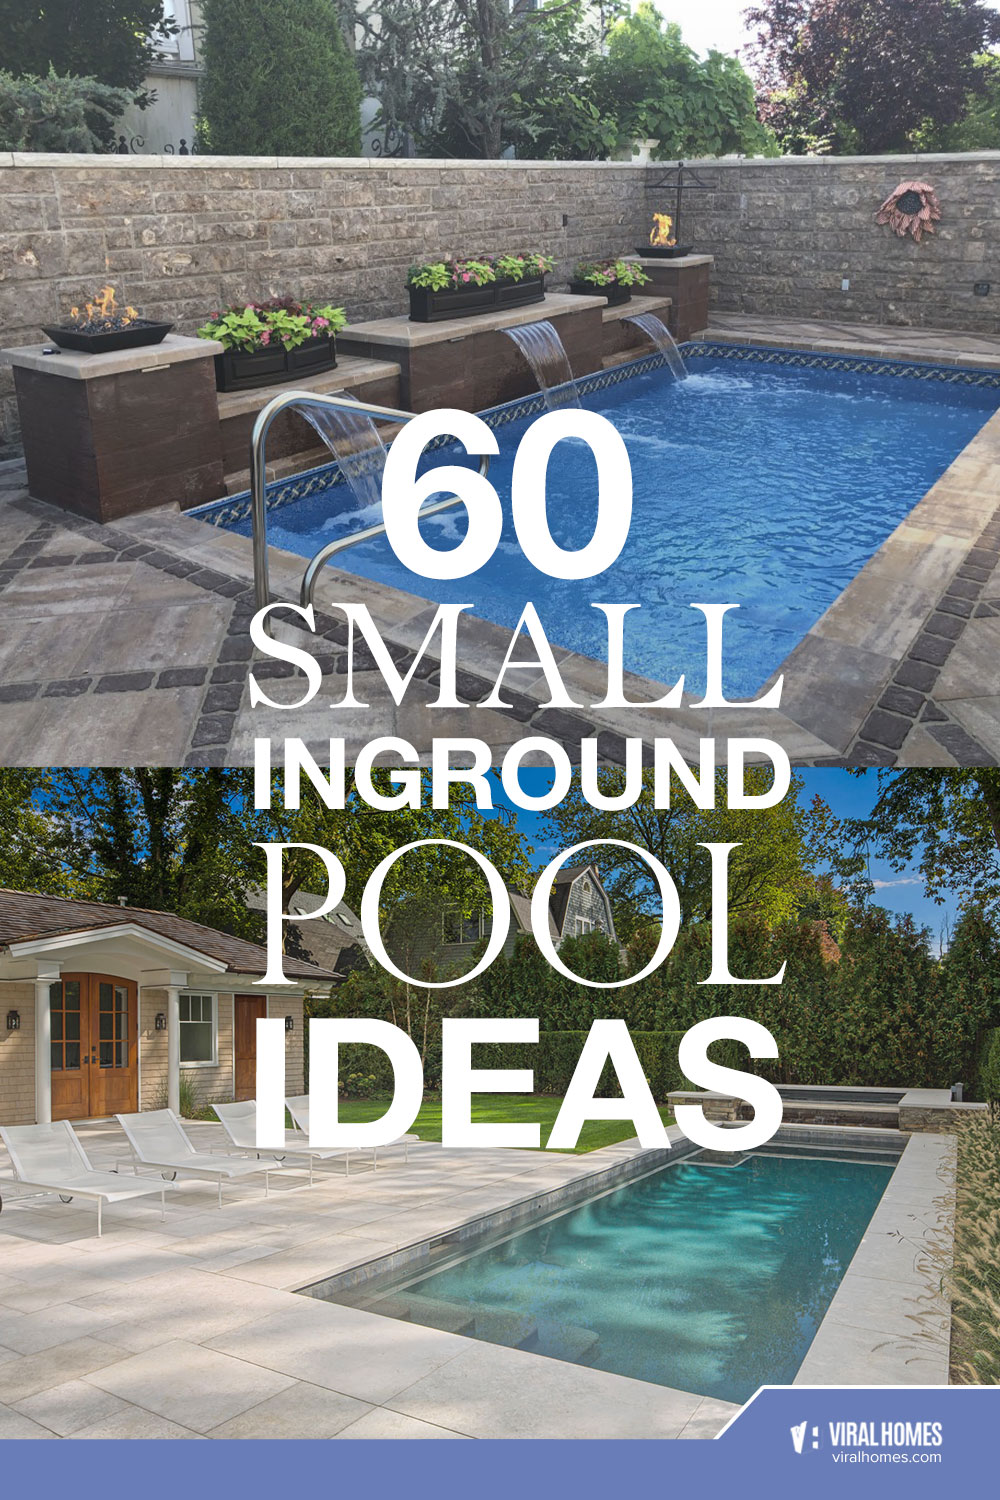 Intimate Small Inground Pool Ideas You Need To Cozy Up Your Backyard